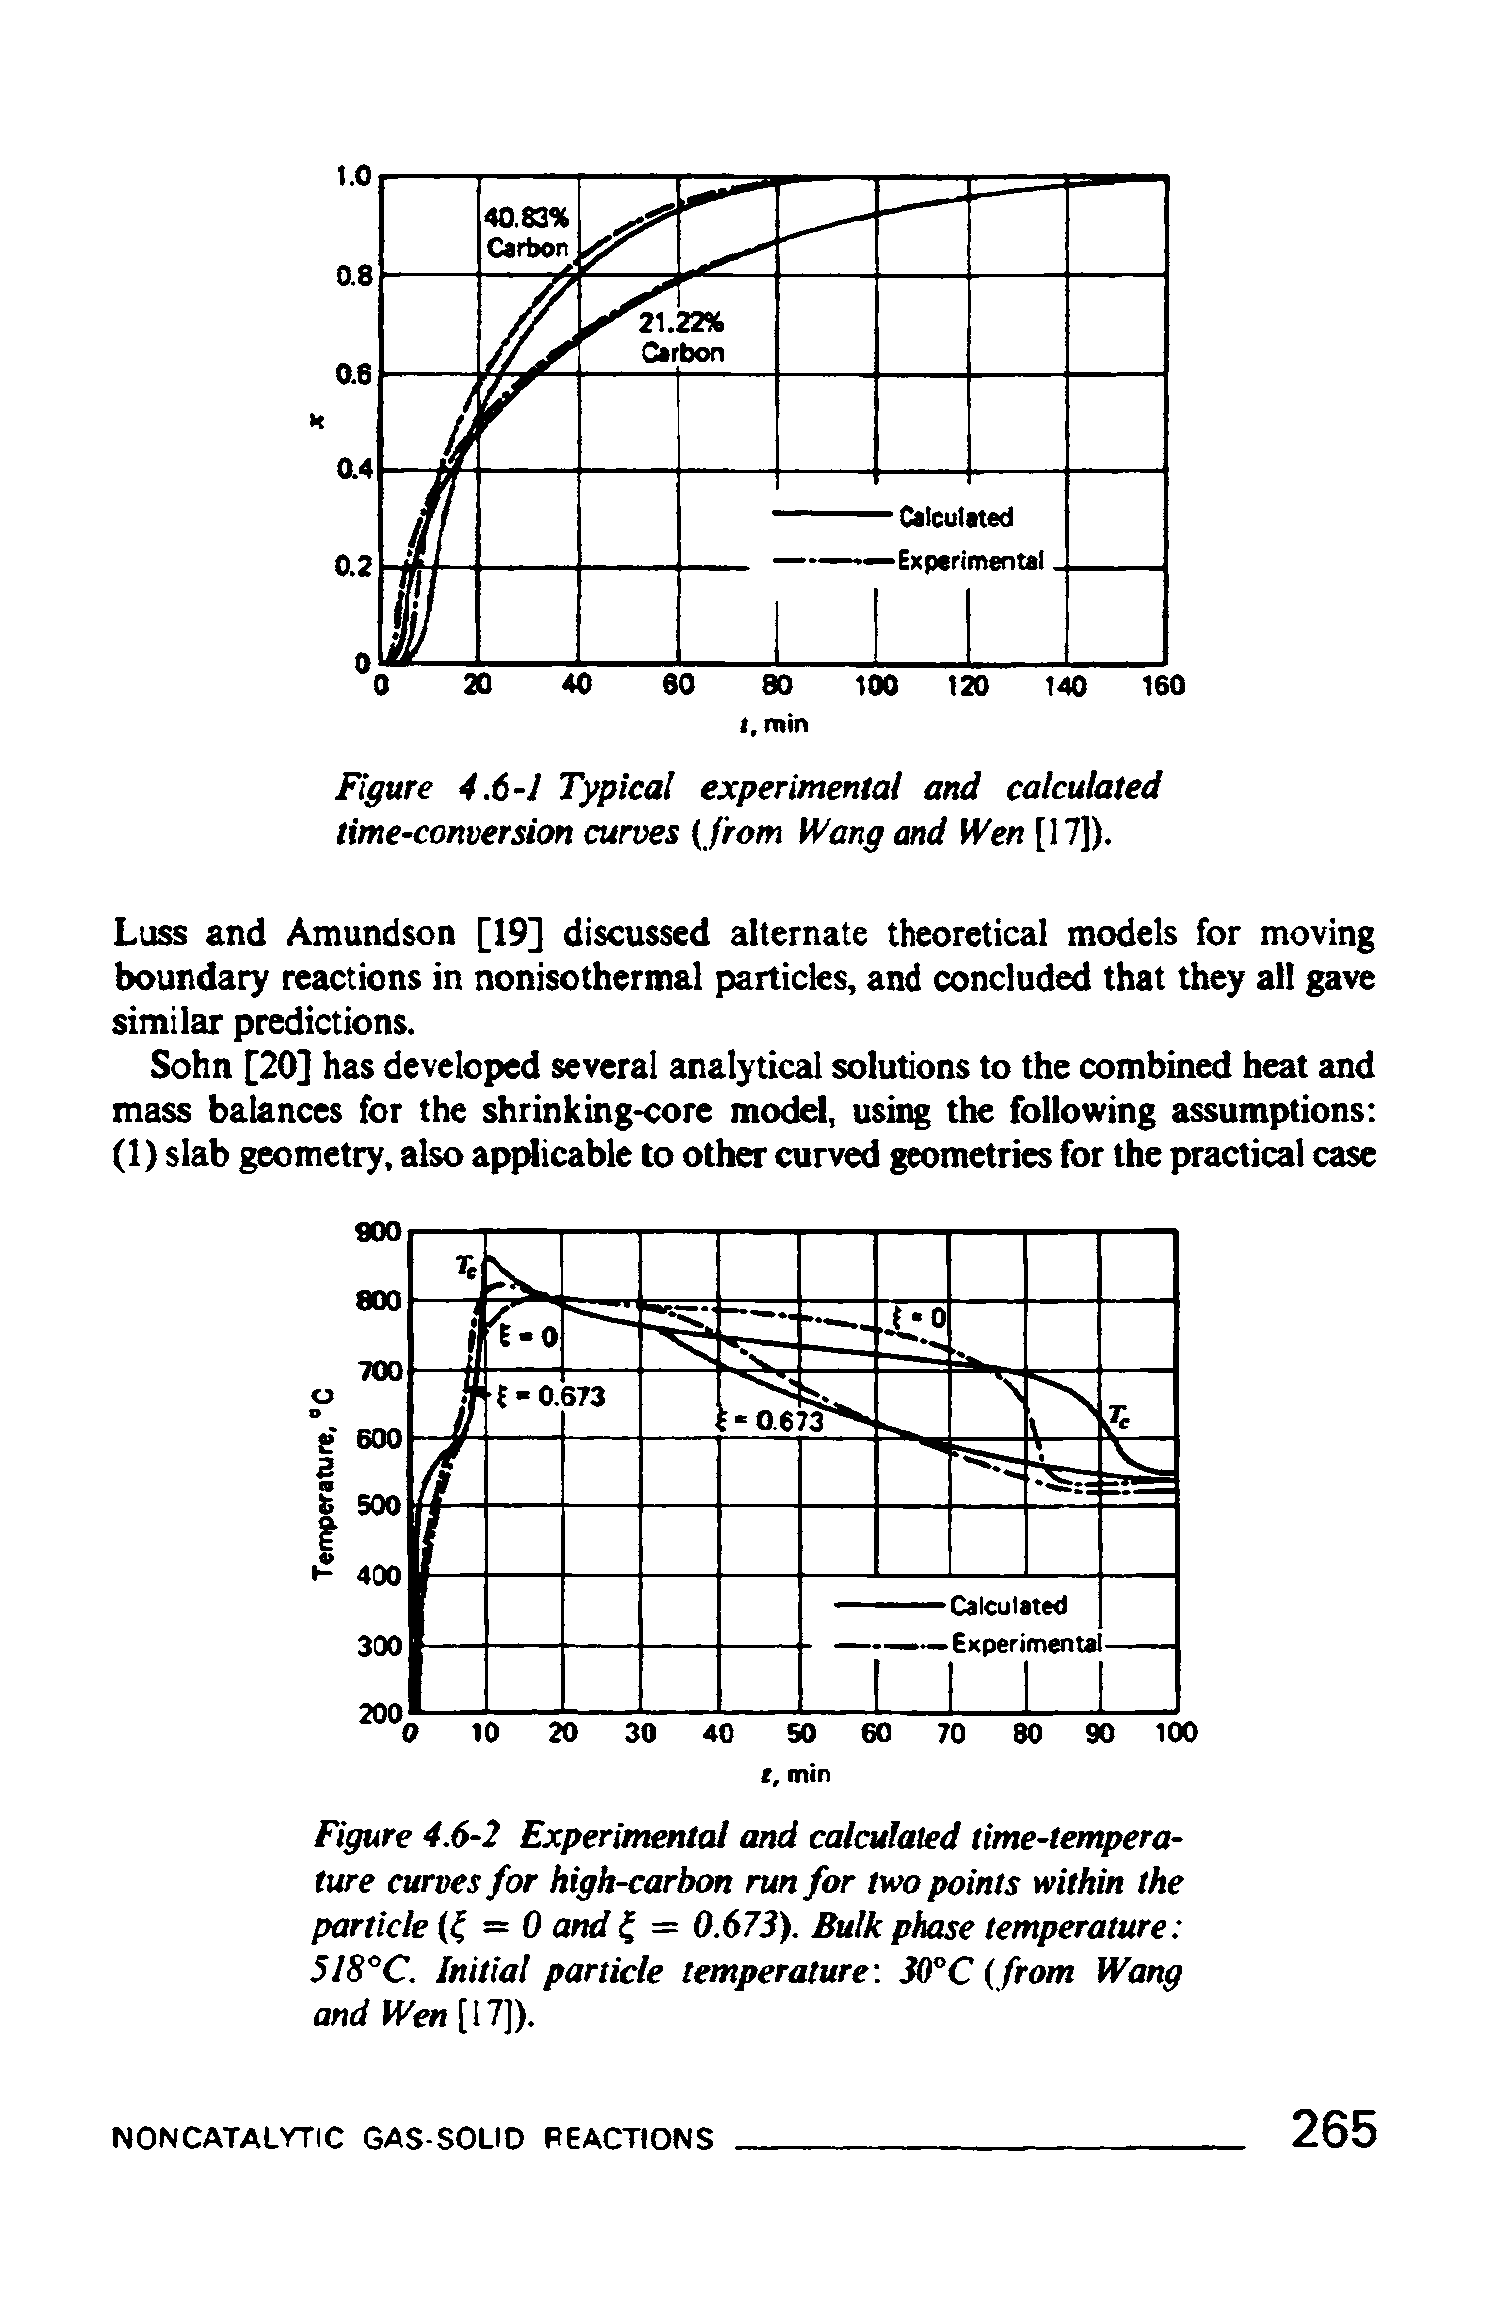 Figure 4.6-2 Experimental and calculated time-temperature curves for high-carbon run for two points within the particle ( = 0 and = 0.673). Bulk phase temperature 518°C. Initial particle temperature. (from Wang and Wen [17]).